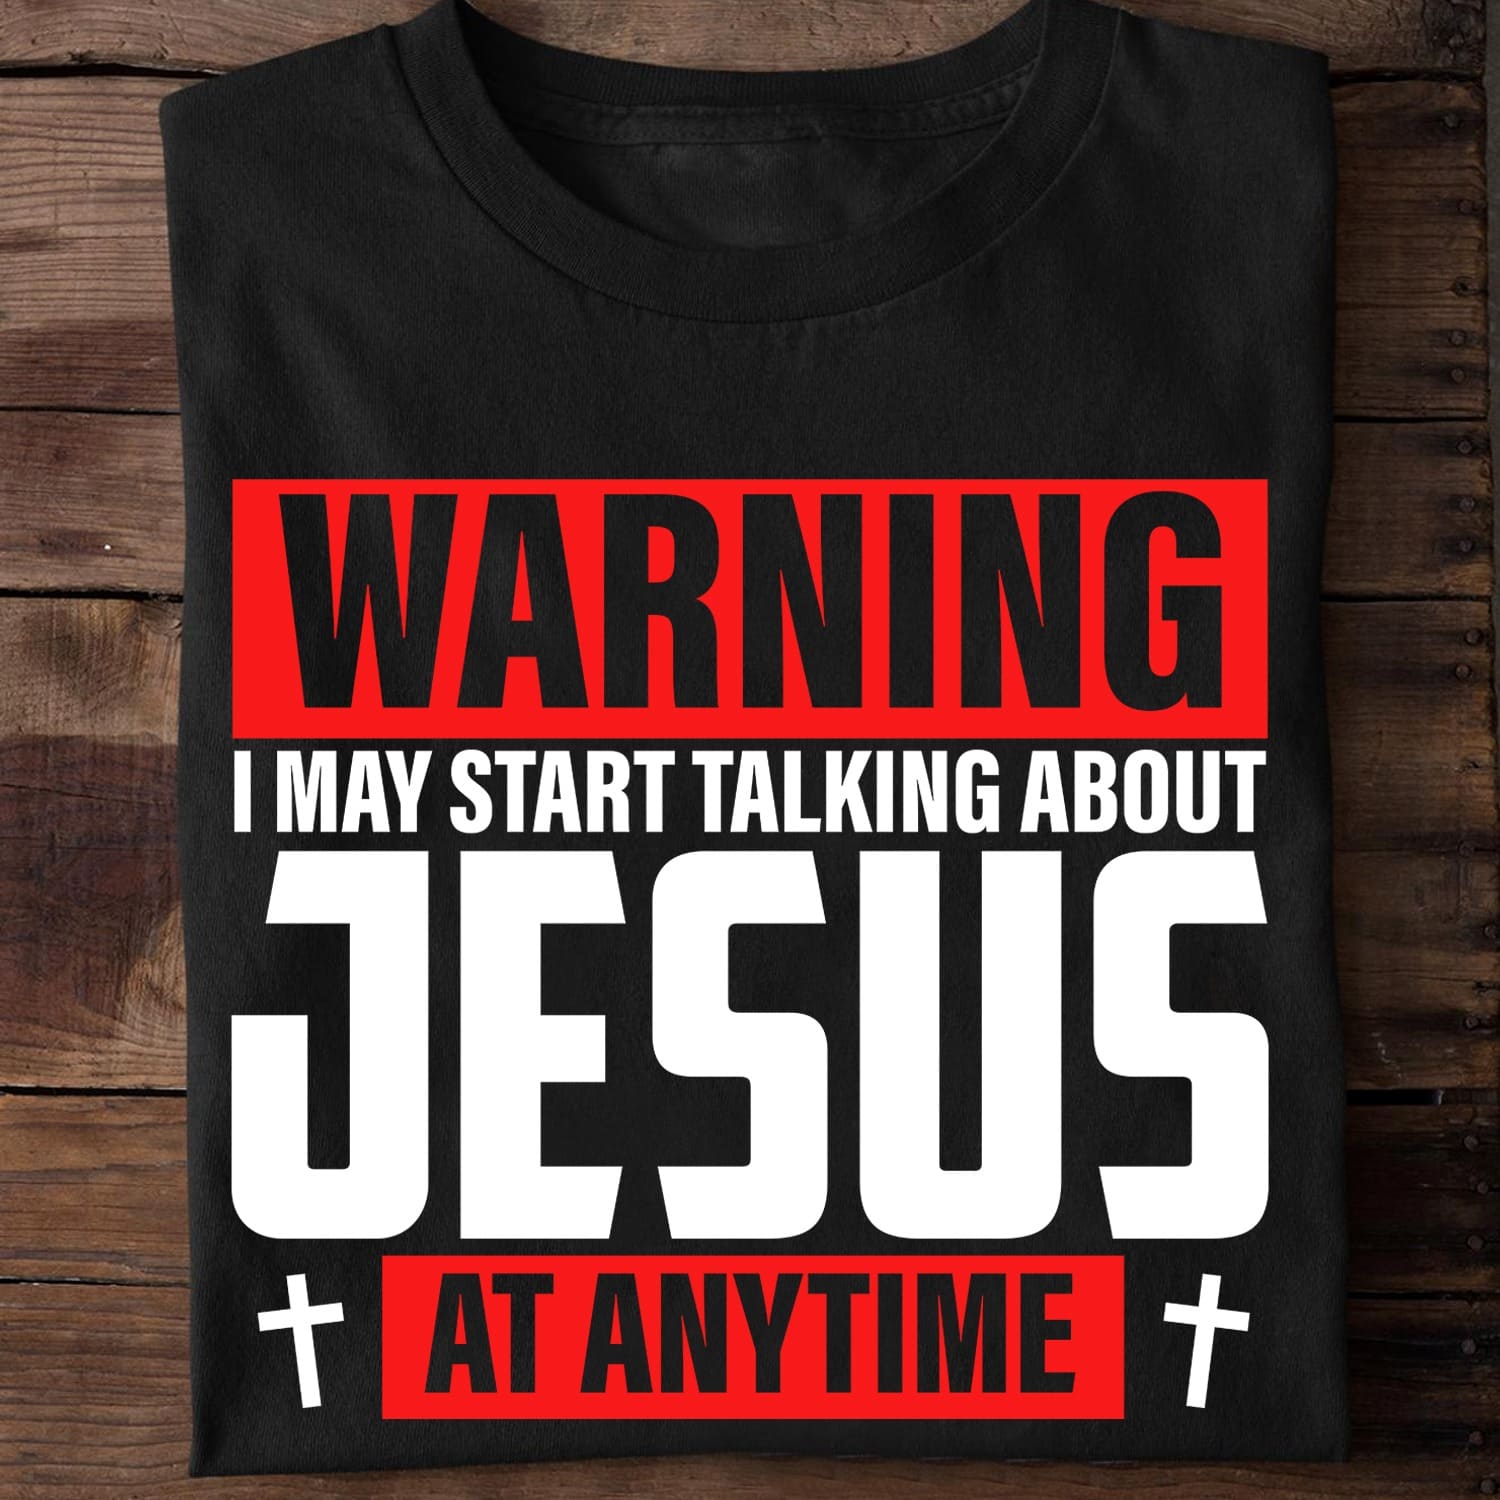 Warning I may start talking about Jesus at anytime - Jesus the god, Believe in Jesus